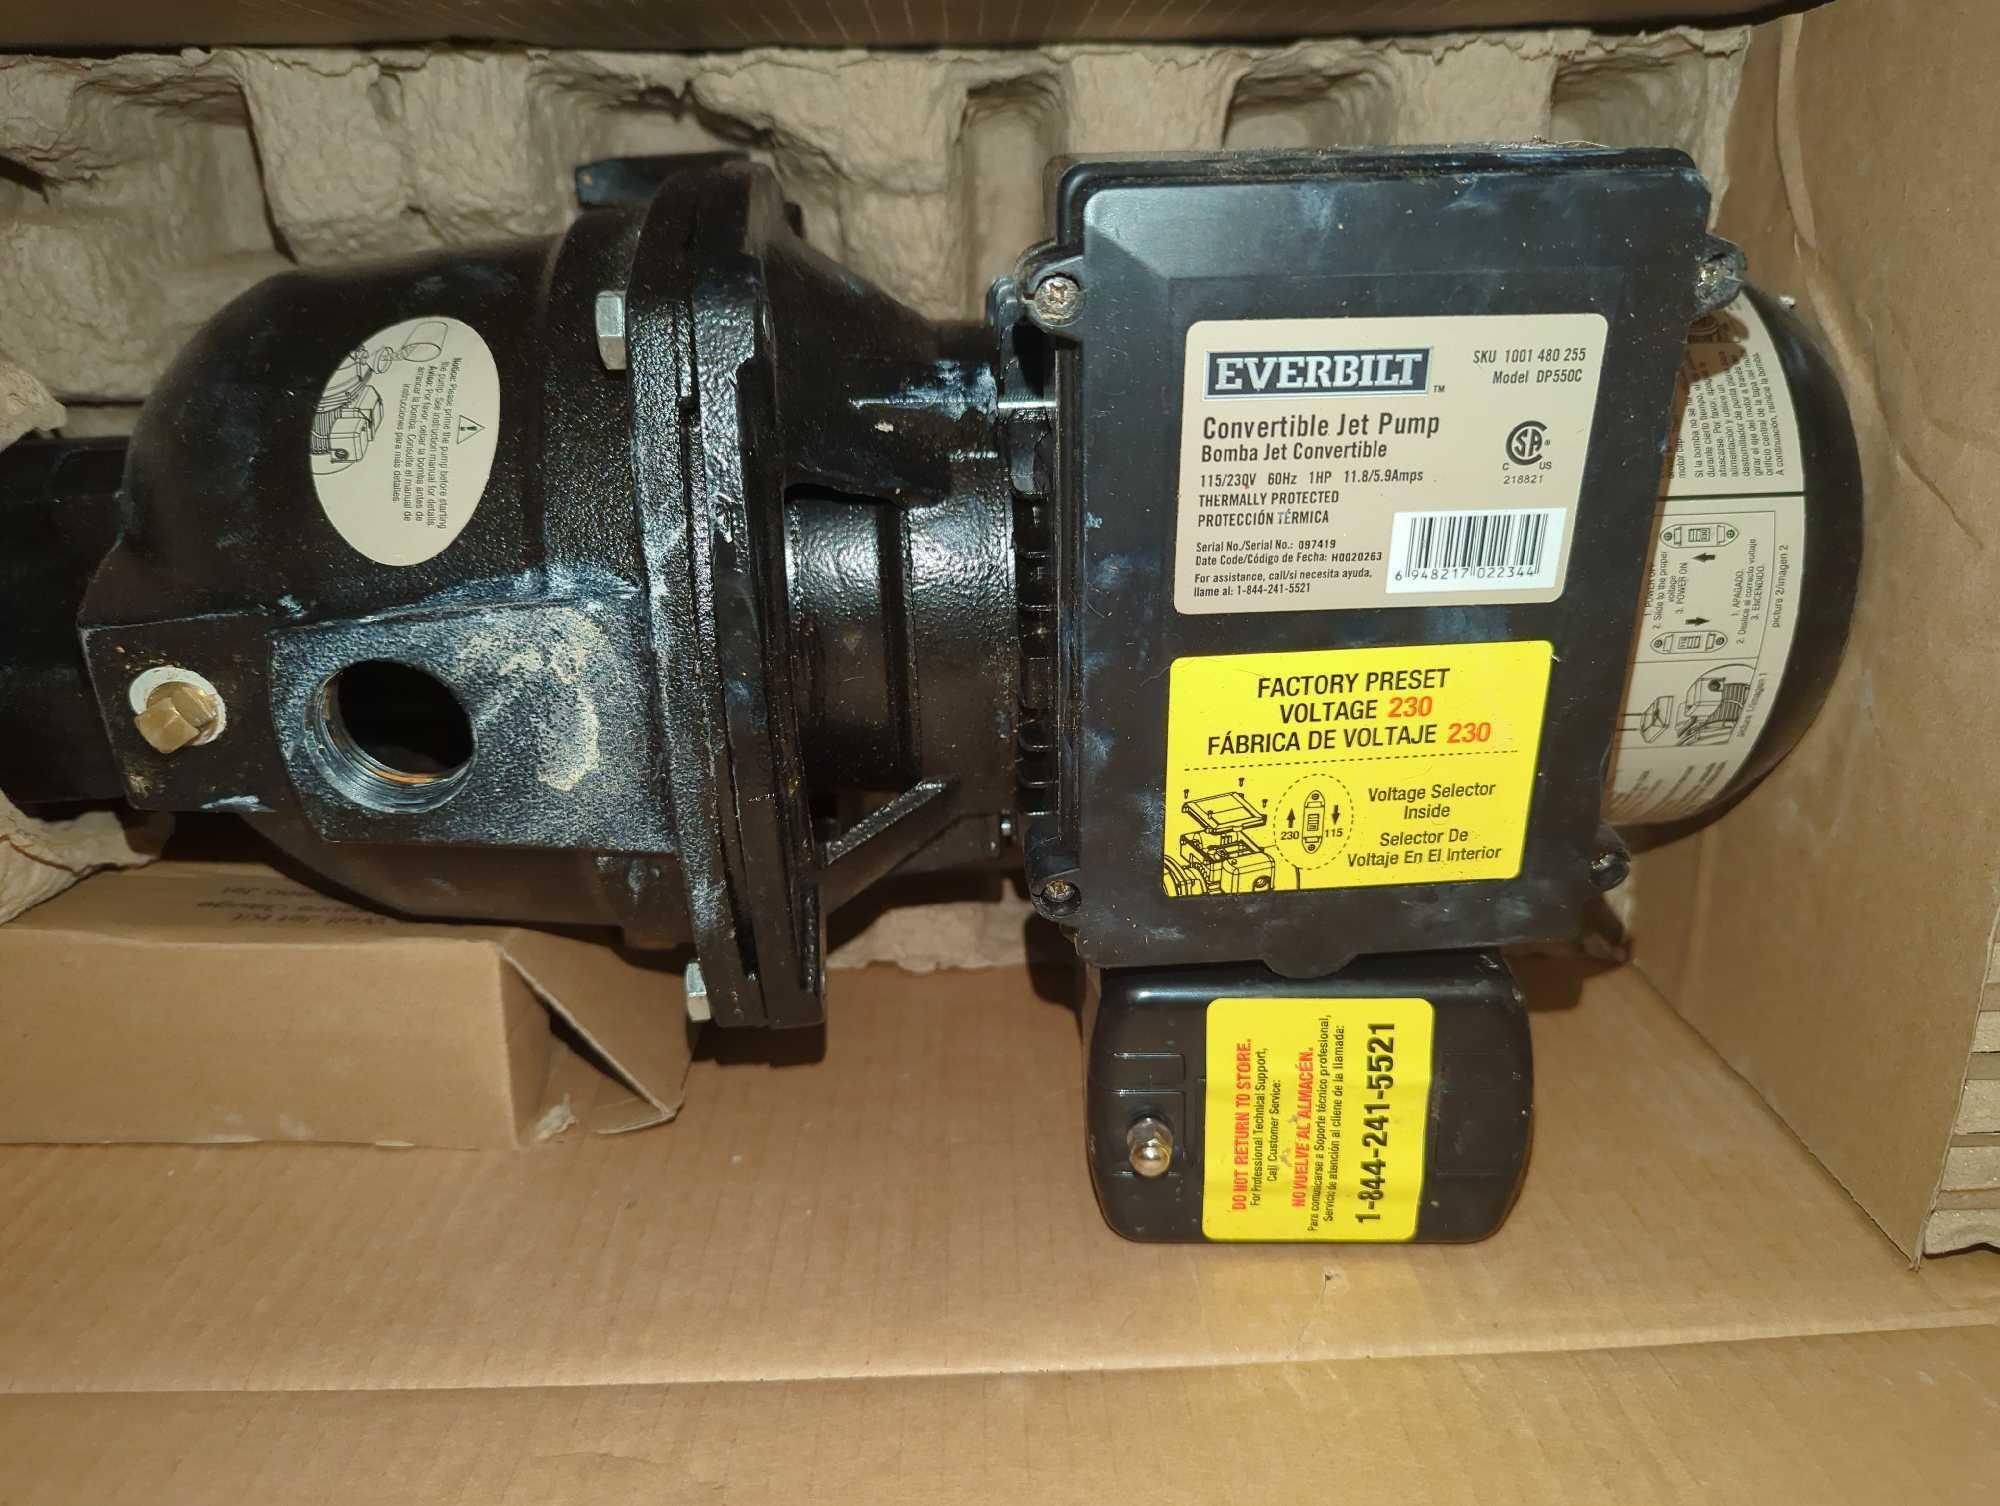 Everbilt 1 HP Convertible Jet Pump, Appears to be Used in Open Box Do to being Used Some Pieces May